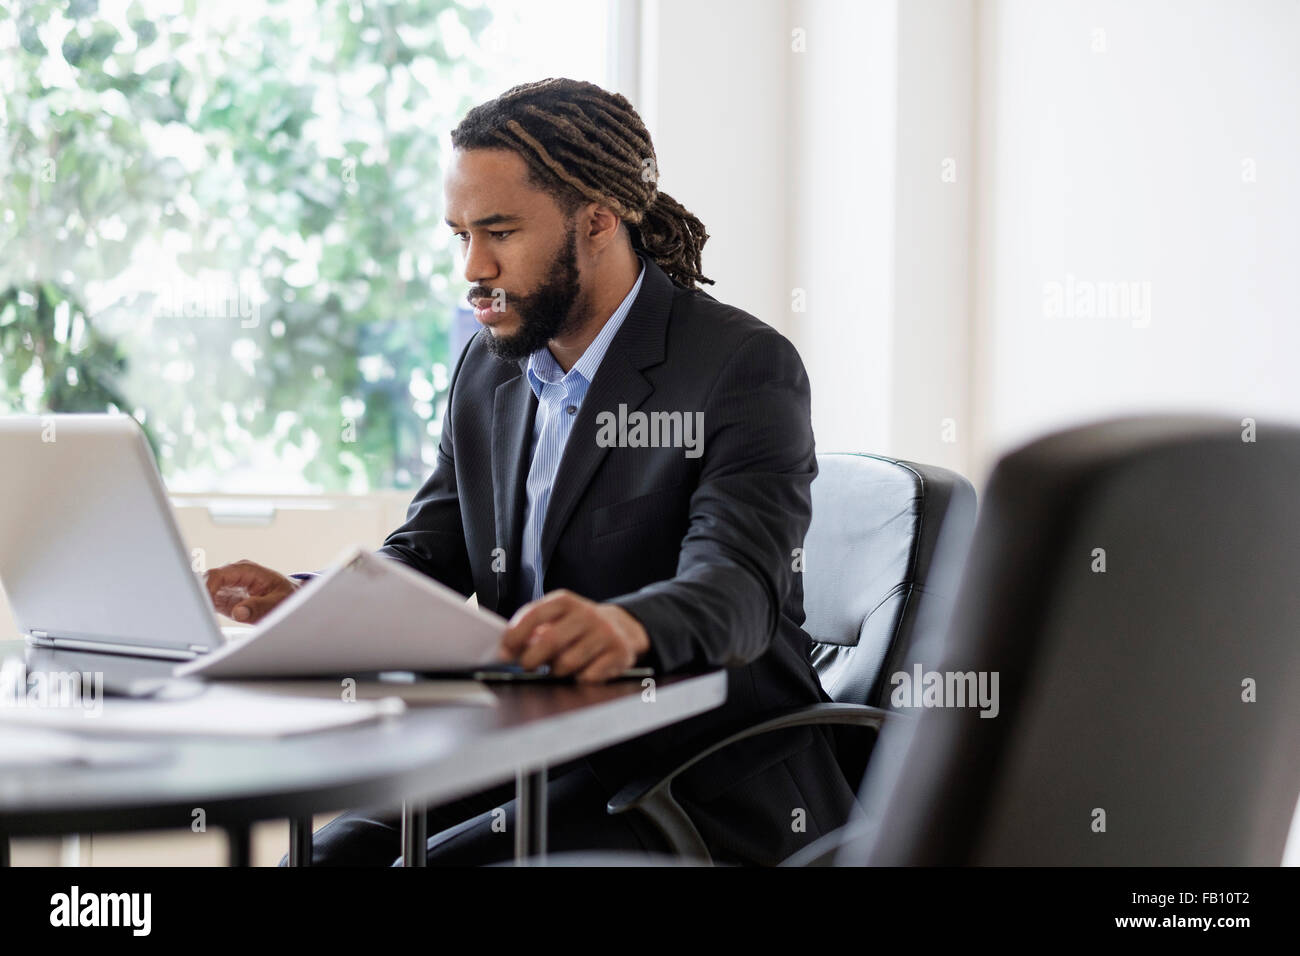 Concentrated businessman working with laptop at desk in office Stock Photo